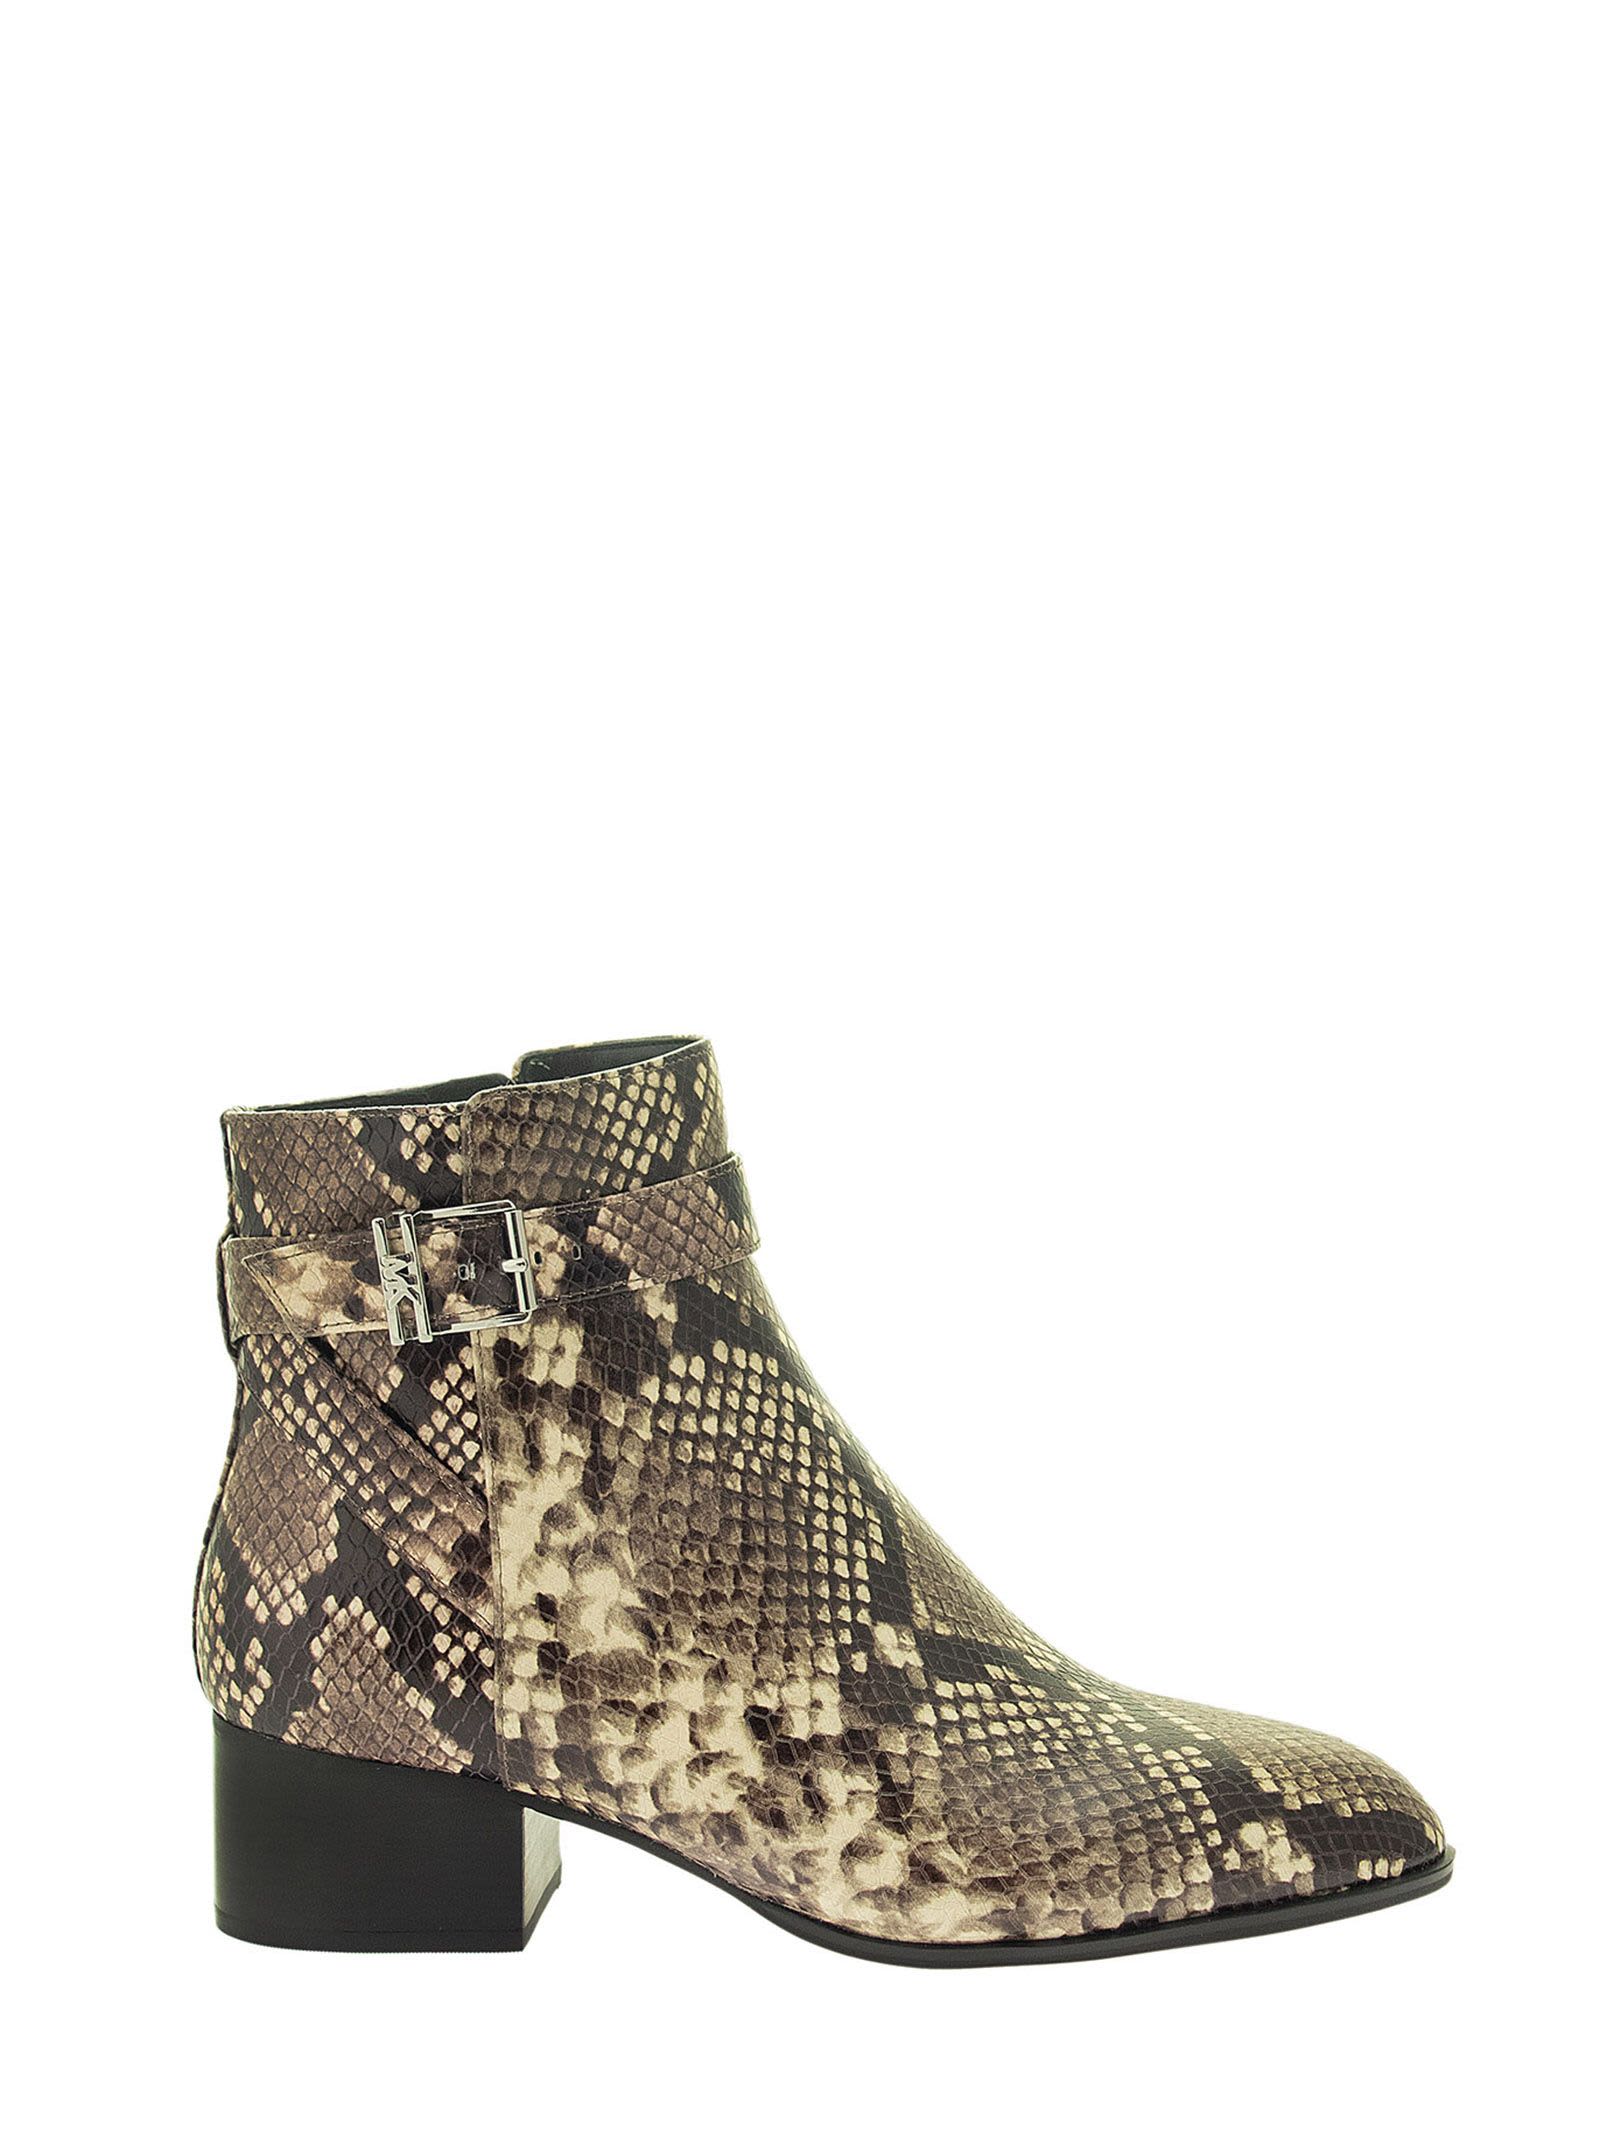 Michael Kors Britton Ankle Boot In Snake Print Leather